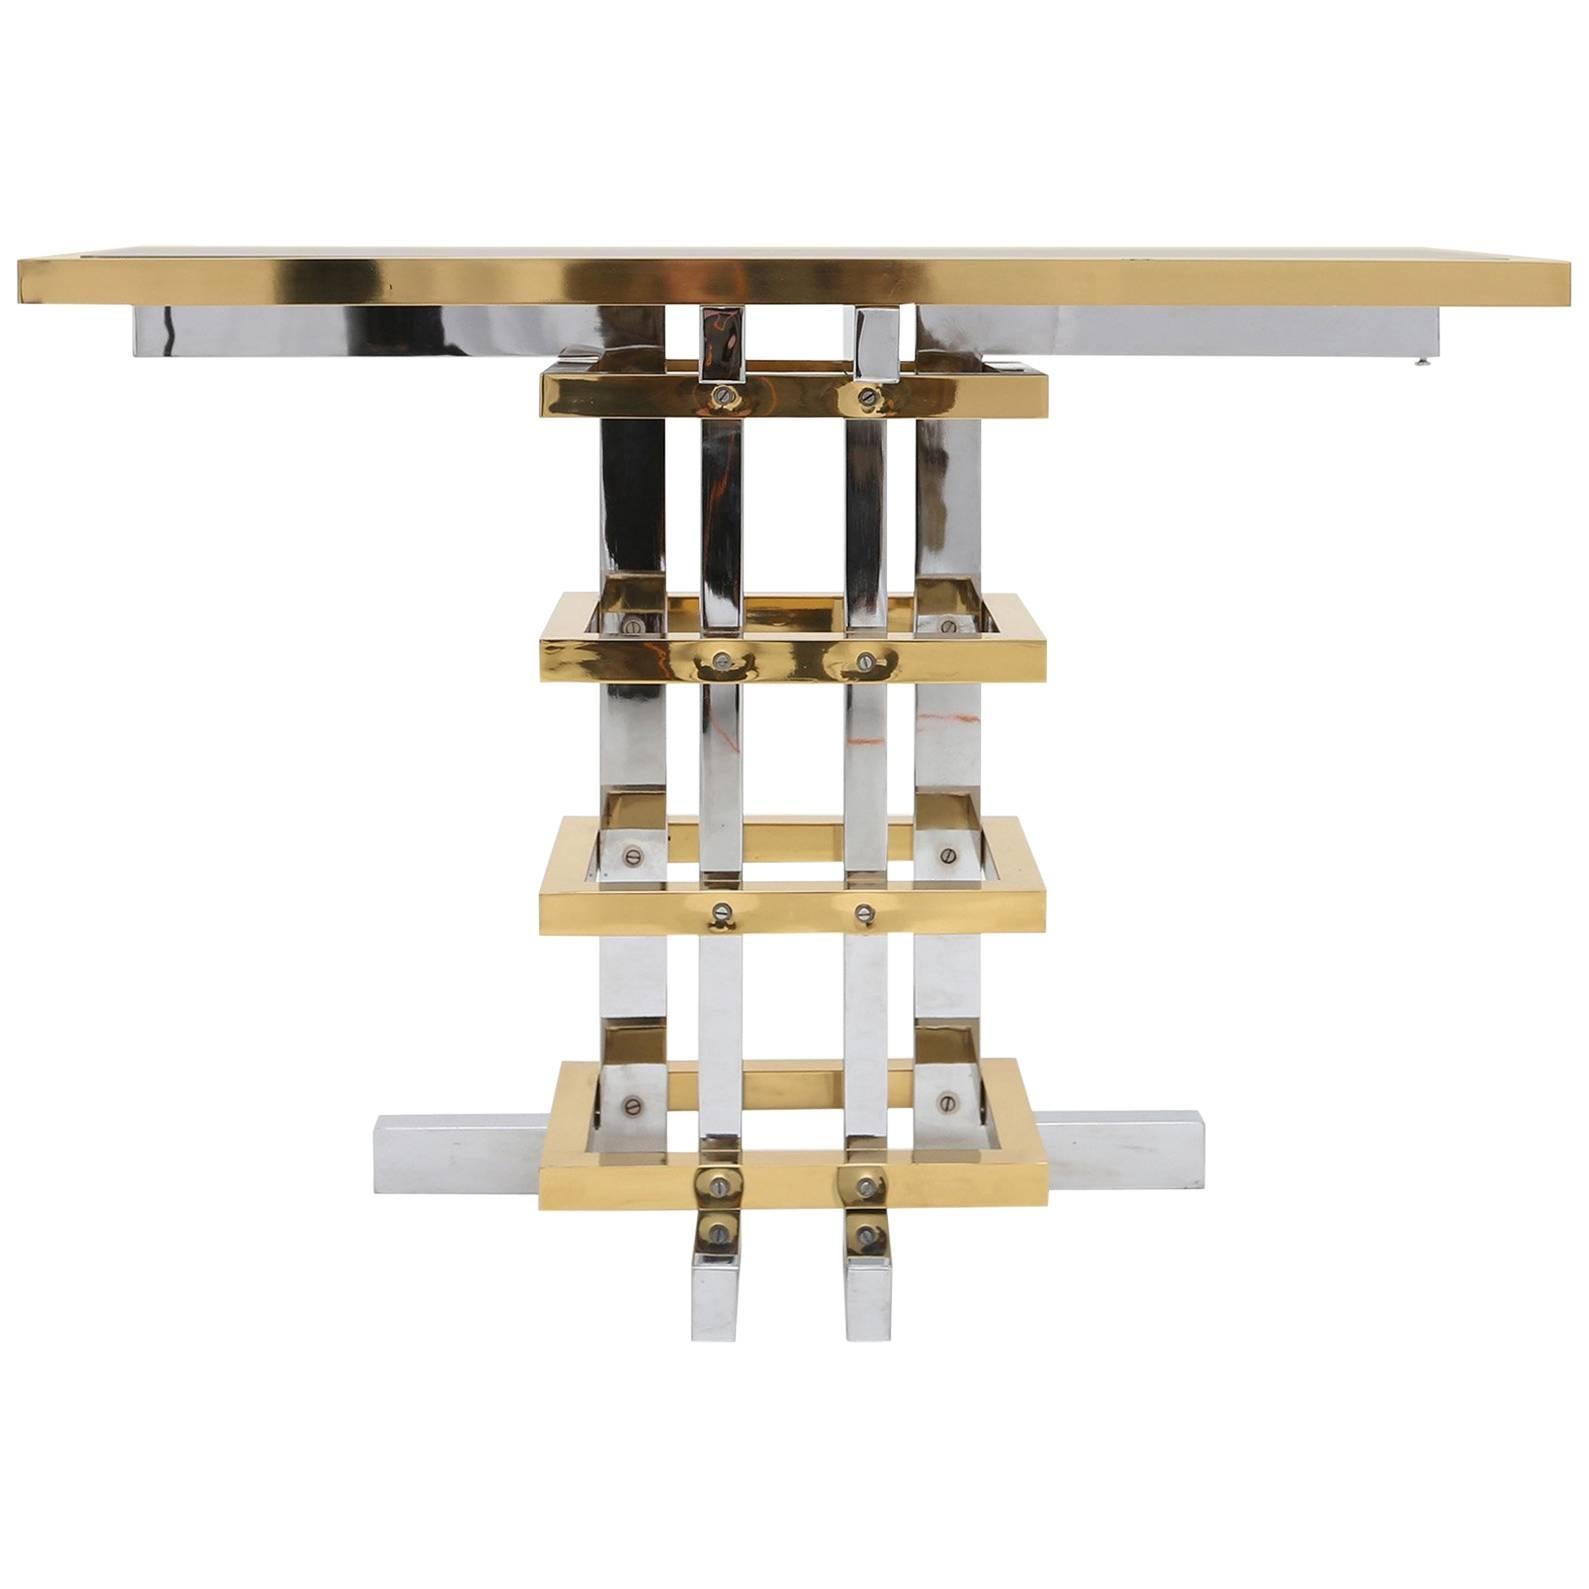 Brass and chrome console table, style Maison Jansen. by artist Duchise. Knokke, Belgium, the 1970s.
Would fit well in an eclectic interior inspired by Pierre Cardin, Romeo Rega, or Willy Rizzo.

Brass and chromed metal. 
Smoked mirrored glass